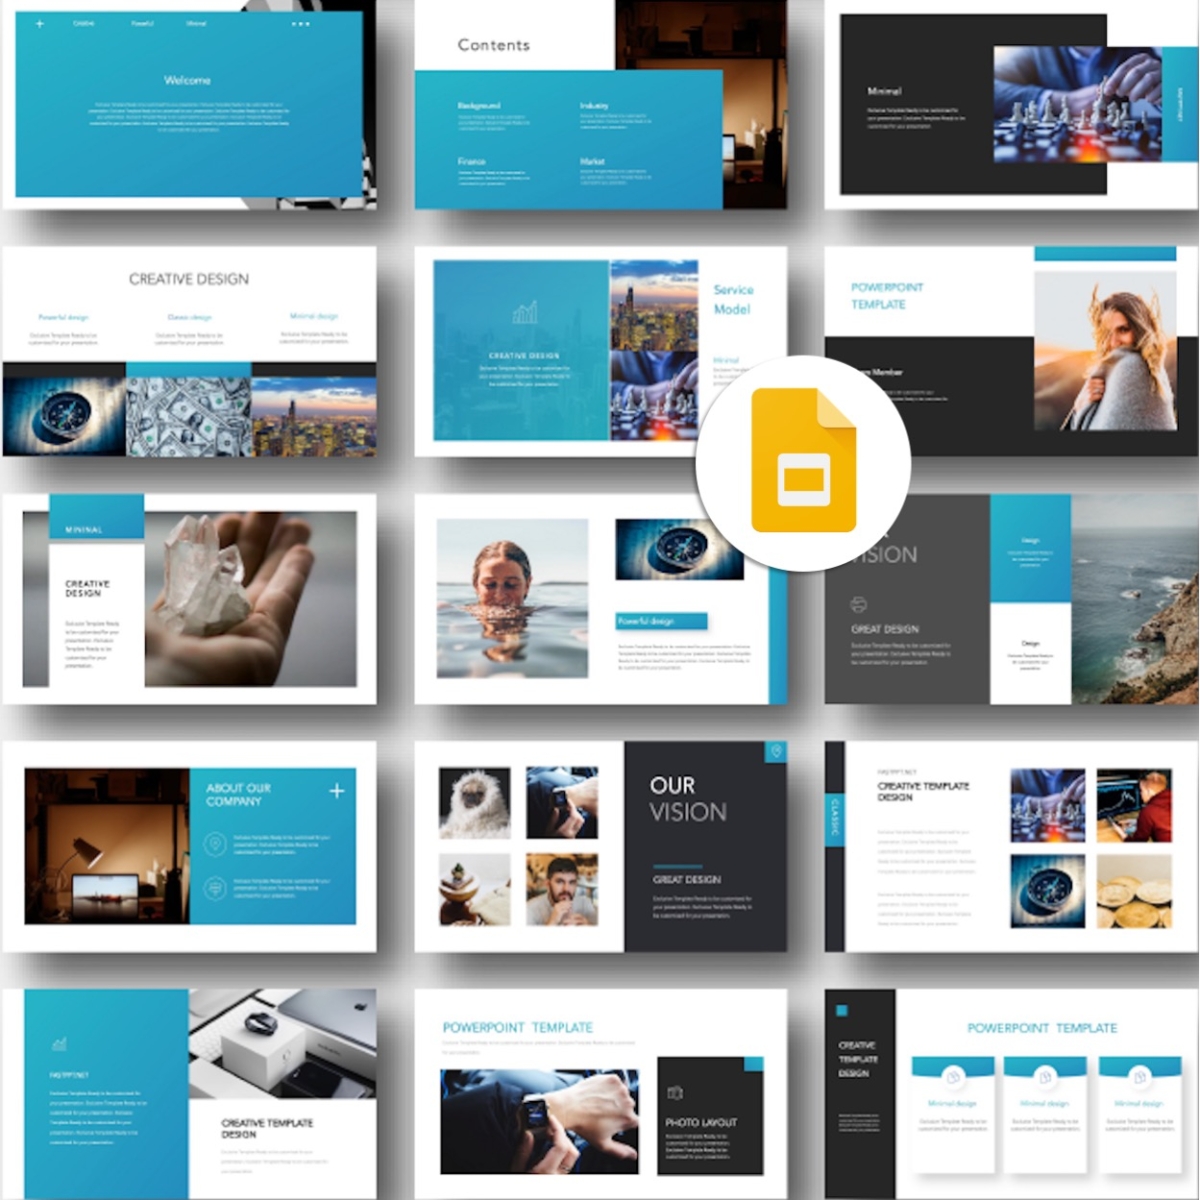 Google Slides-Business and Creative Agency Presentation Template